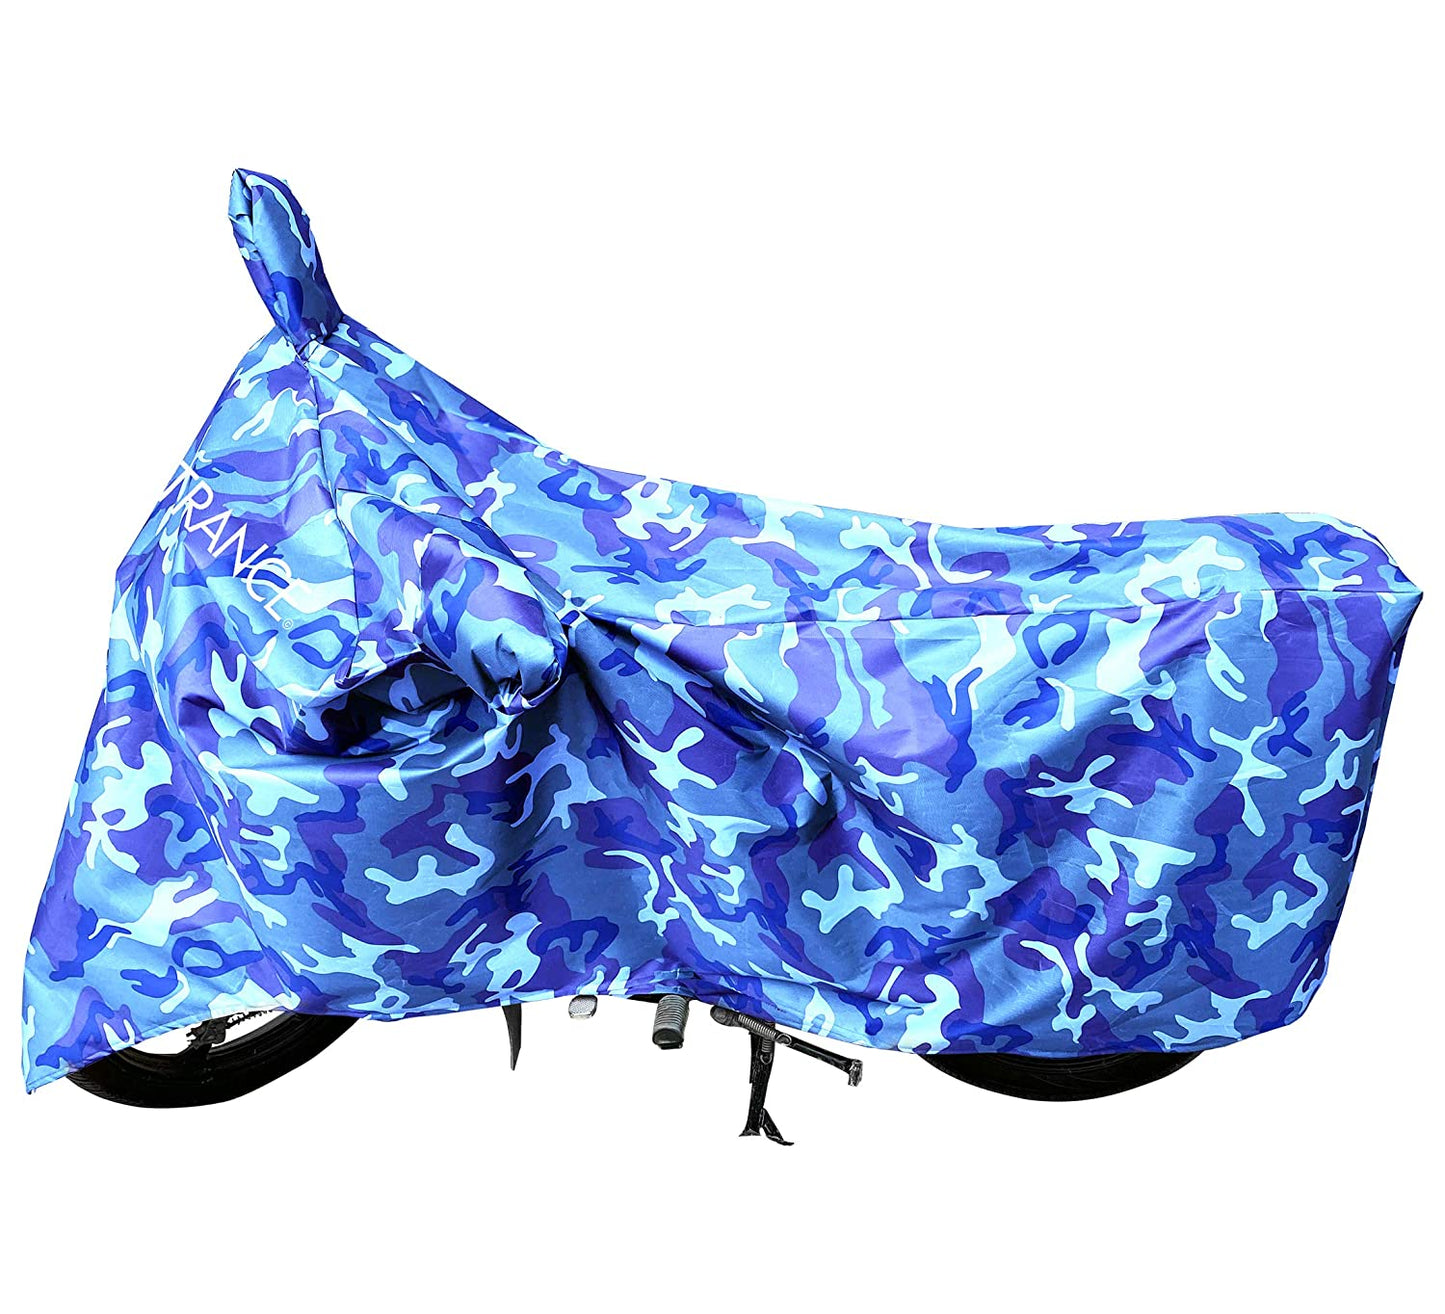 MotoTrance Jungle Bike Body Covers For Honda CBF Stunner - Interlock-Stitched Waterproof and Heat Resistant with Mirror Pockets